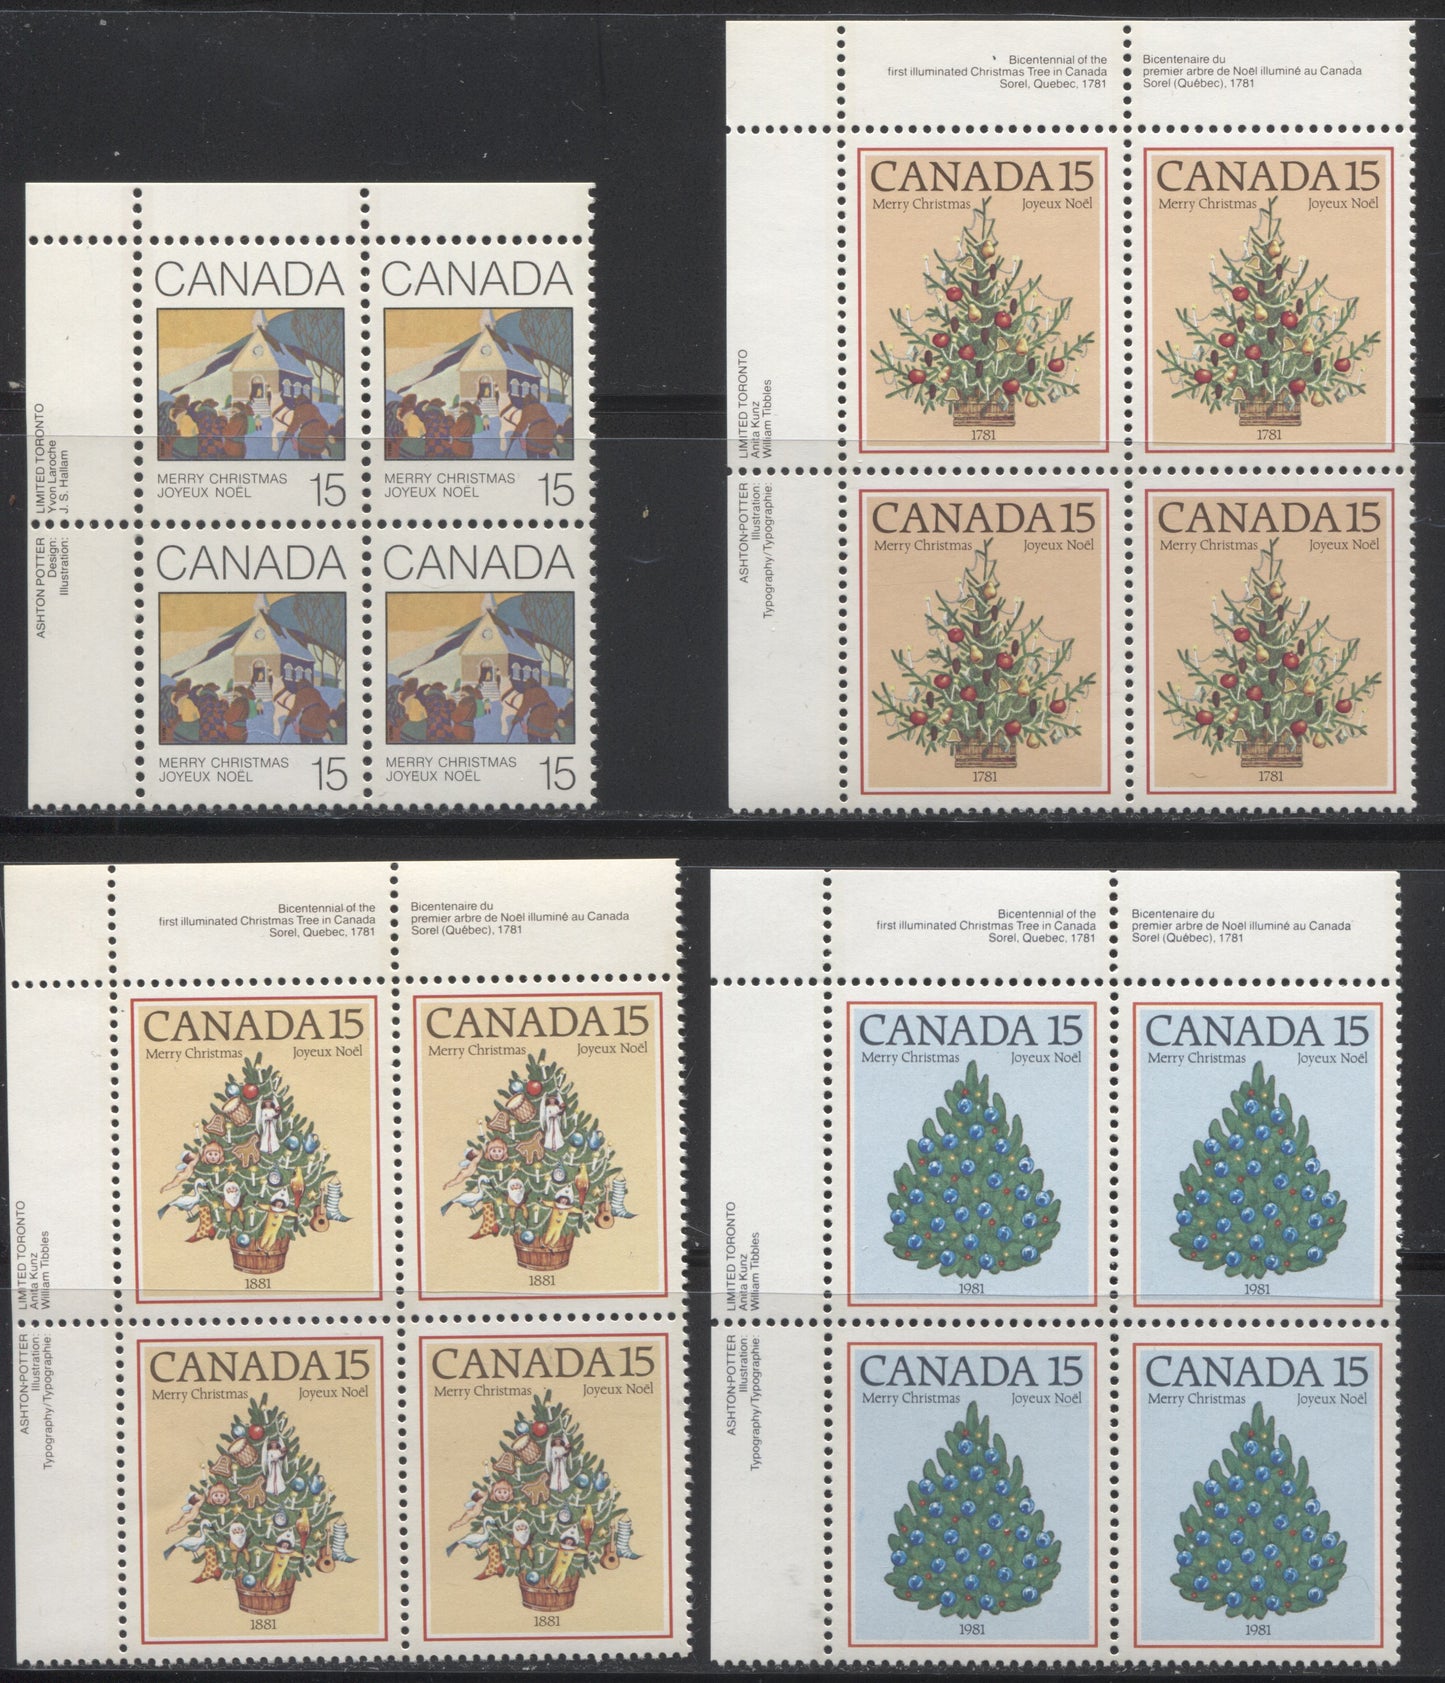 Lot 204 Canada #870/902 1980-1981 Christmas Issues - A Group of 4 Upper Left Inscription Blocks on DF/NF Paper